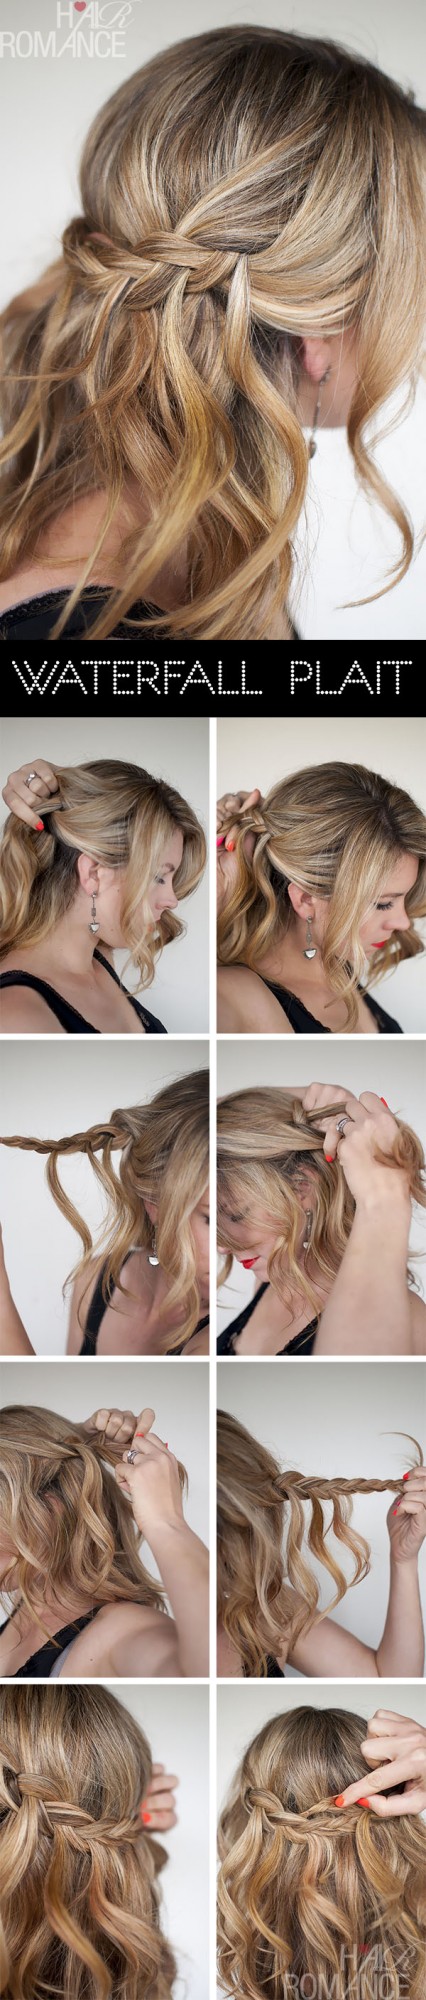 22 Gorgeous Hairstyle Ideas and Tutorials for New Year’s Eve (14)